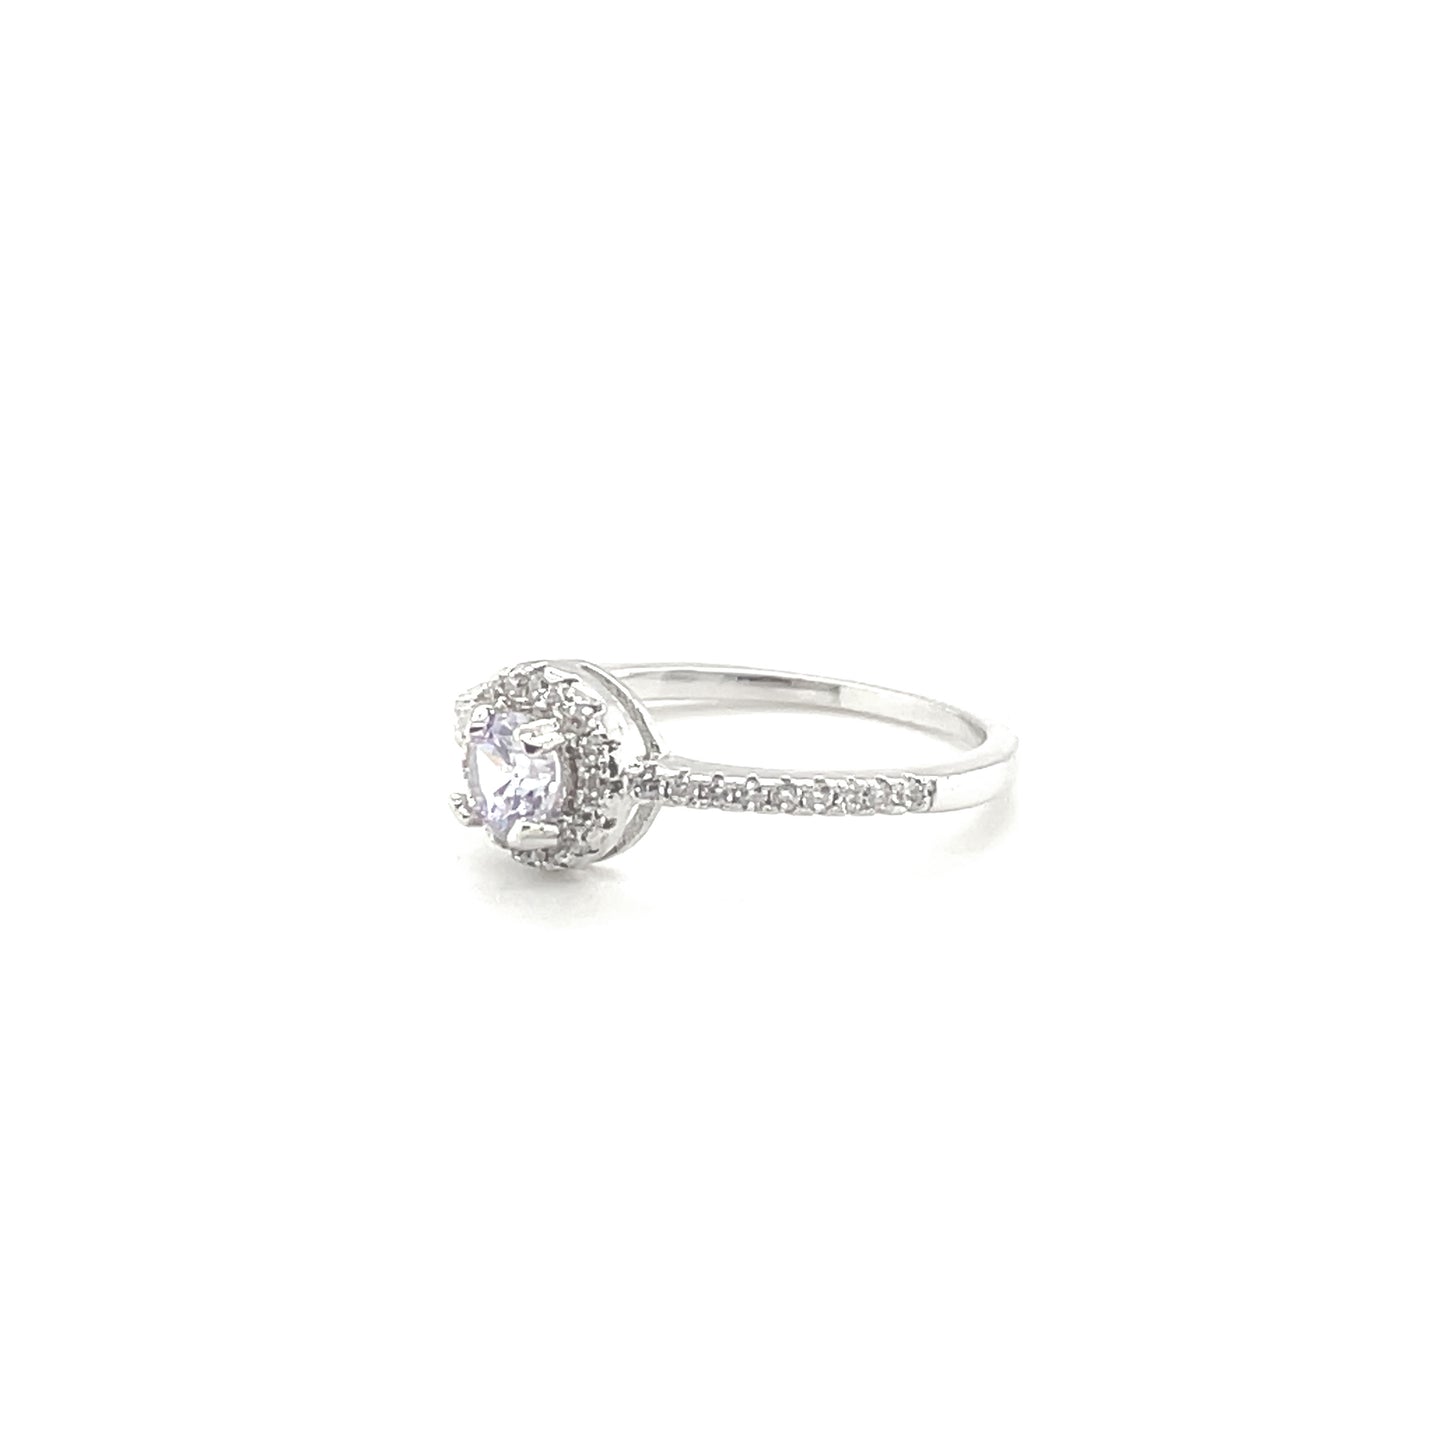 BMR84561WH - Round Cut Solitaire Stone - Engagemet Ring